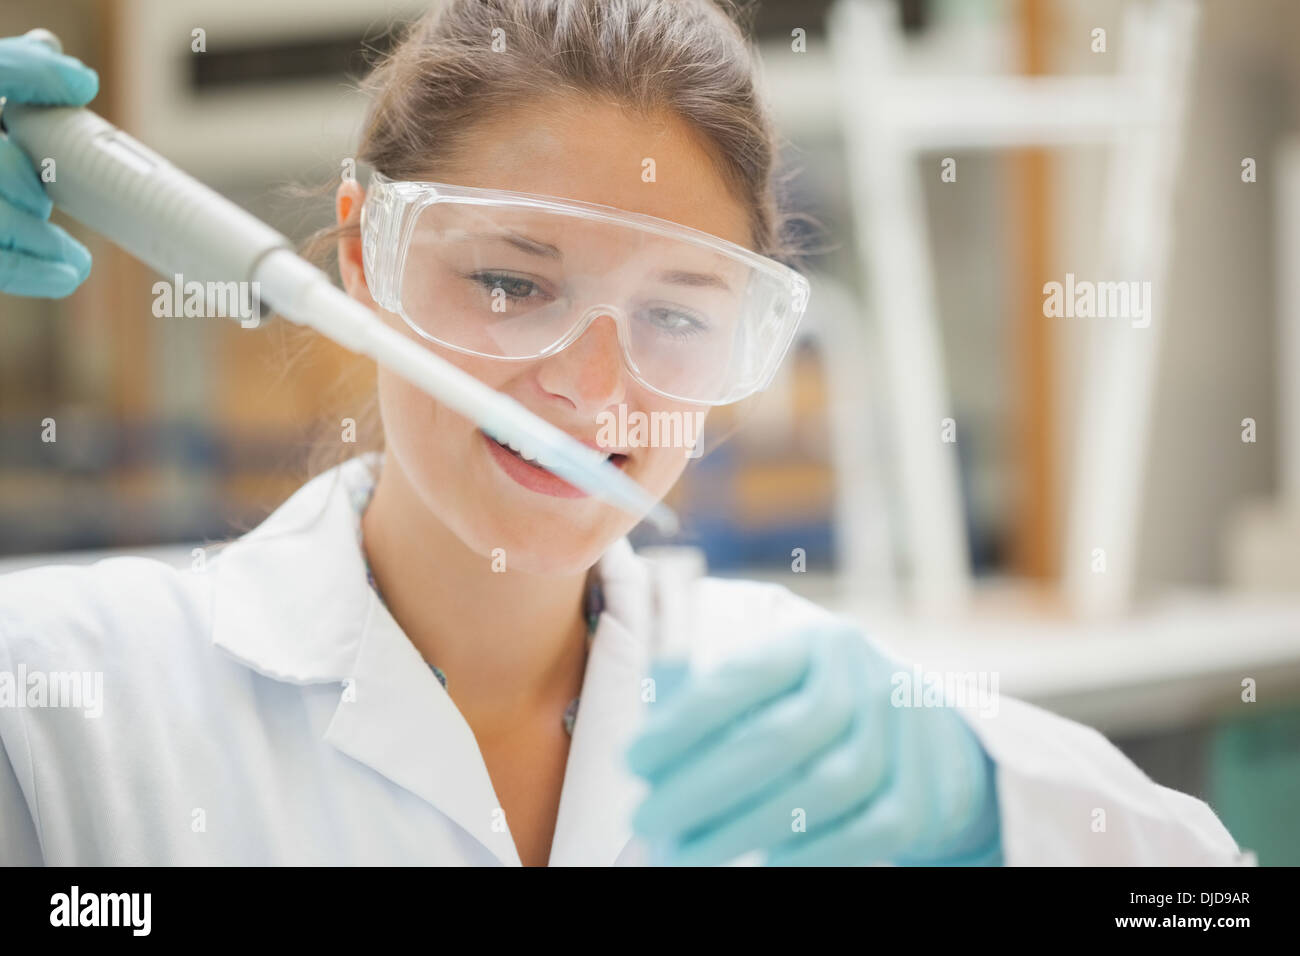 Student holding pipette grand attrayant Banque D'Images